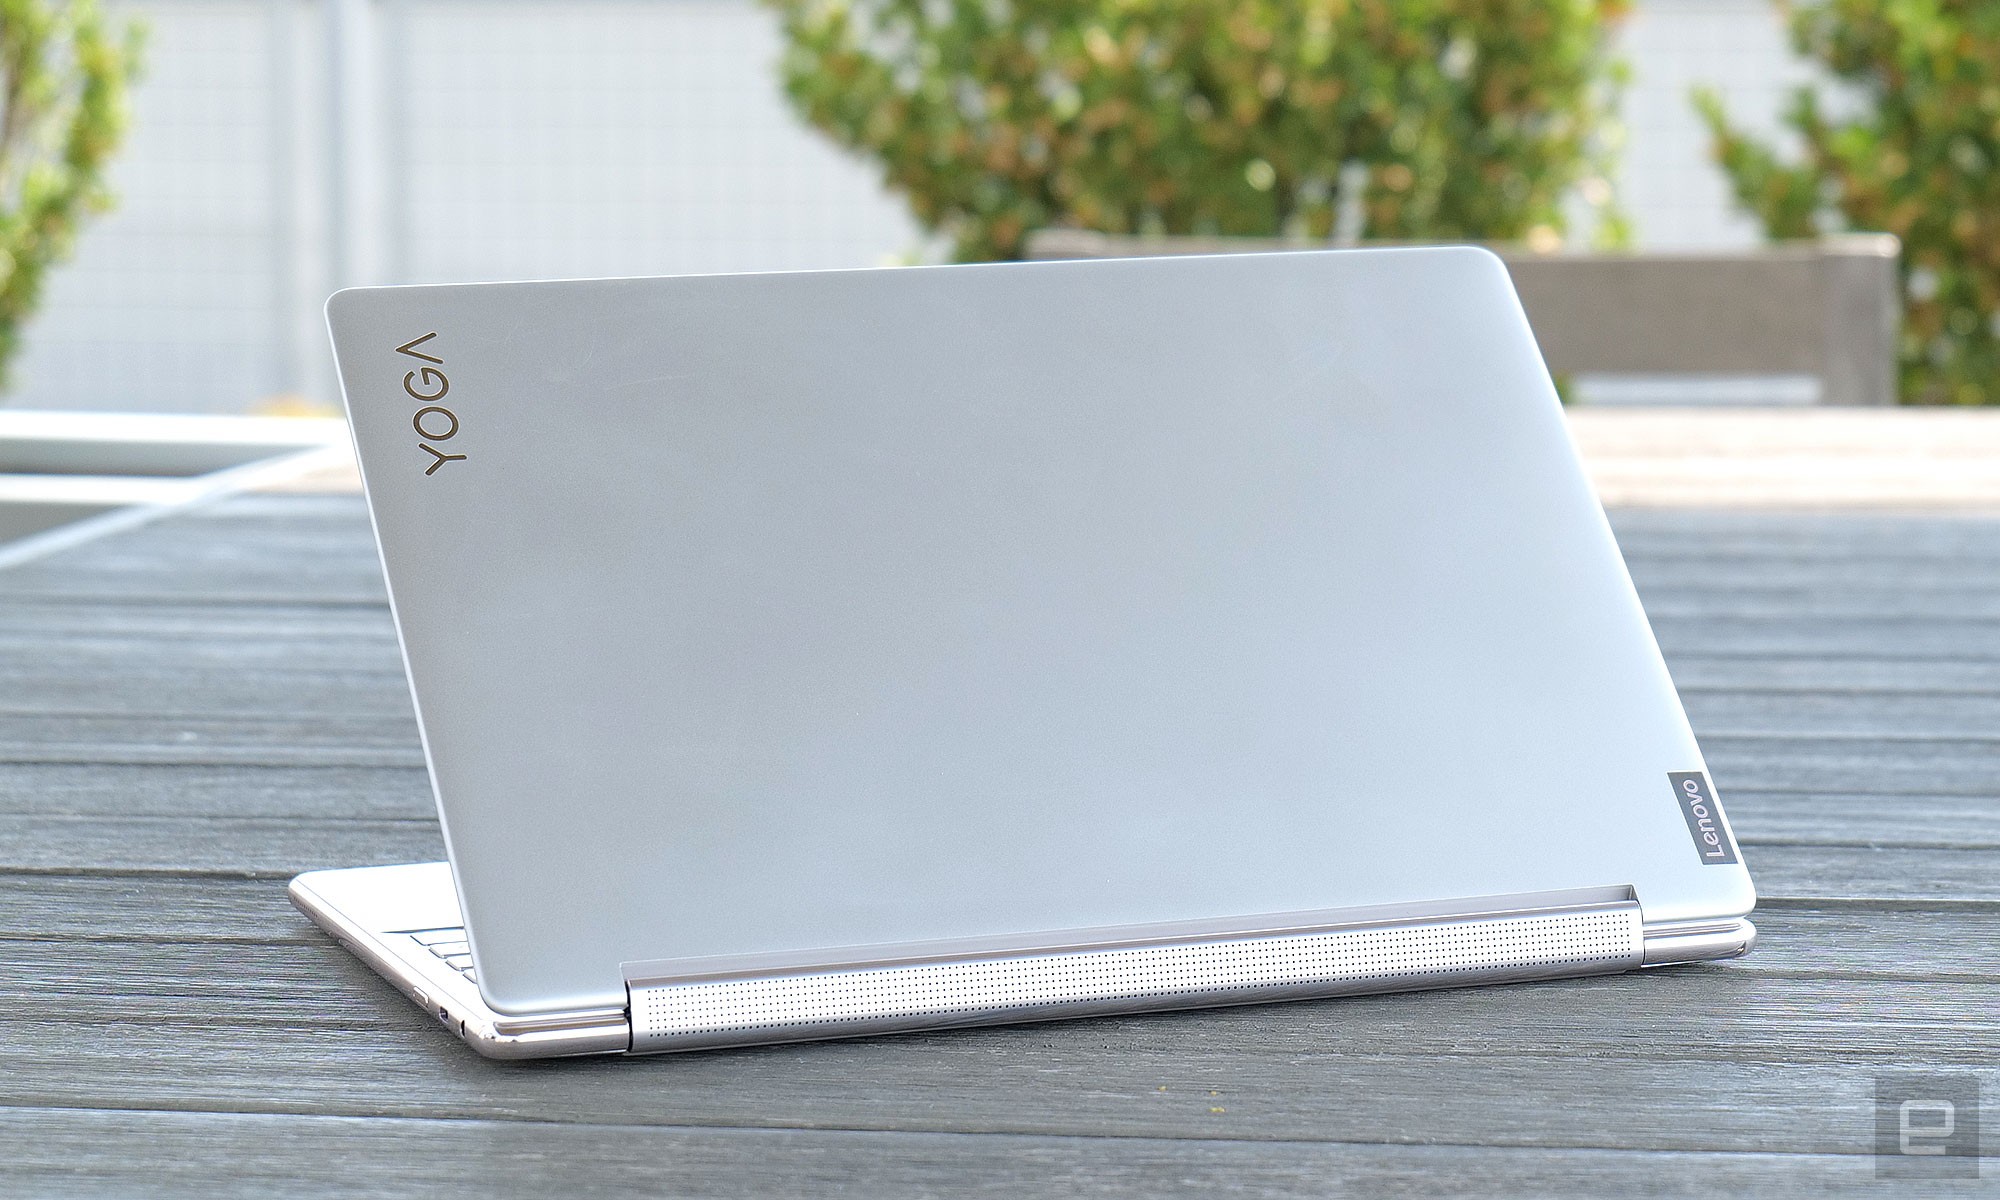 For 2022, Lenovo rounded off the Yoga 9i's sides, which makes it much more comfortable to use and hold. " data-uuid="521b8922-9d44-3263-abc5-ae70c3b192b6